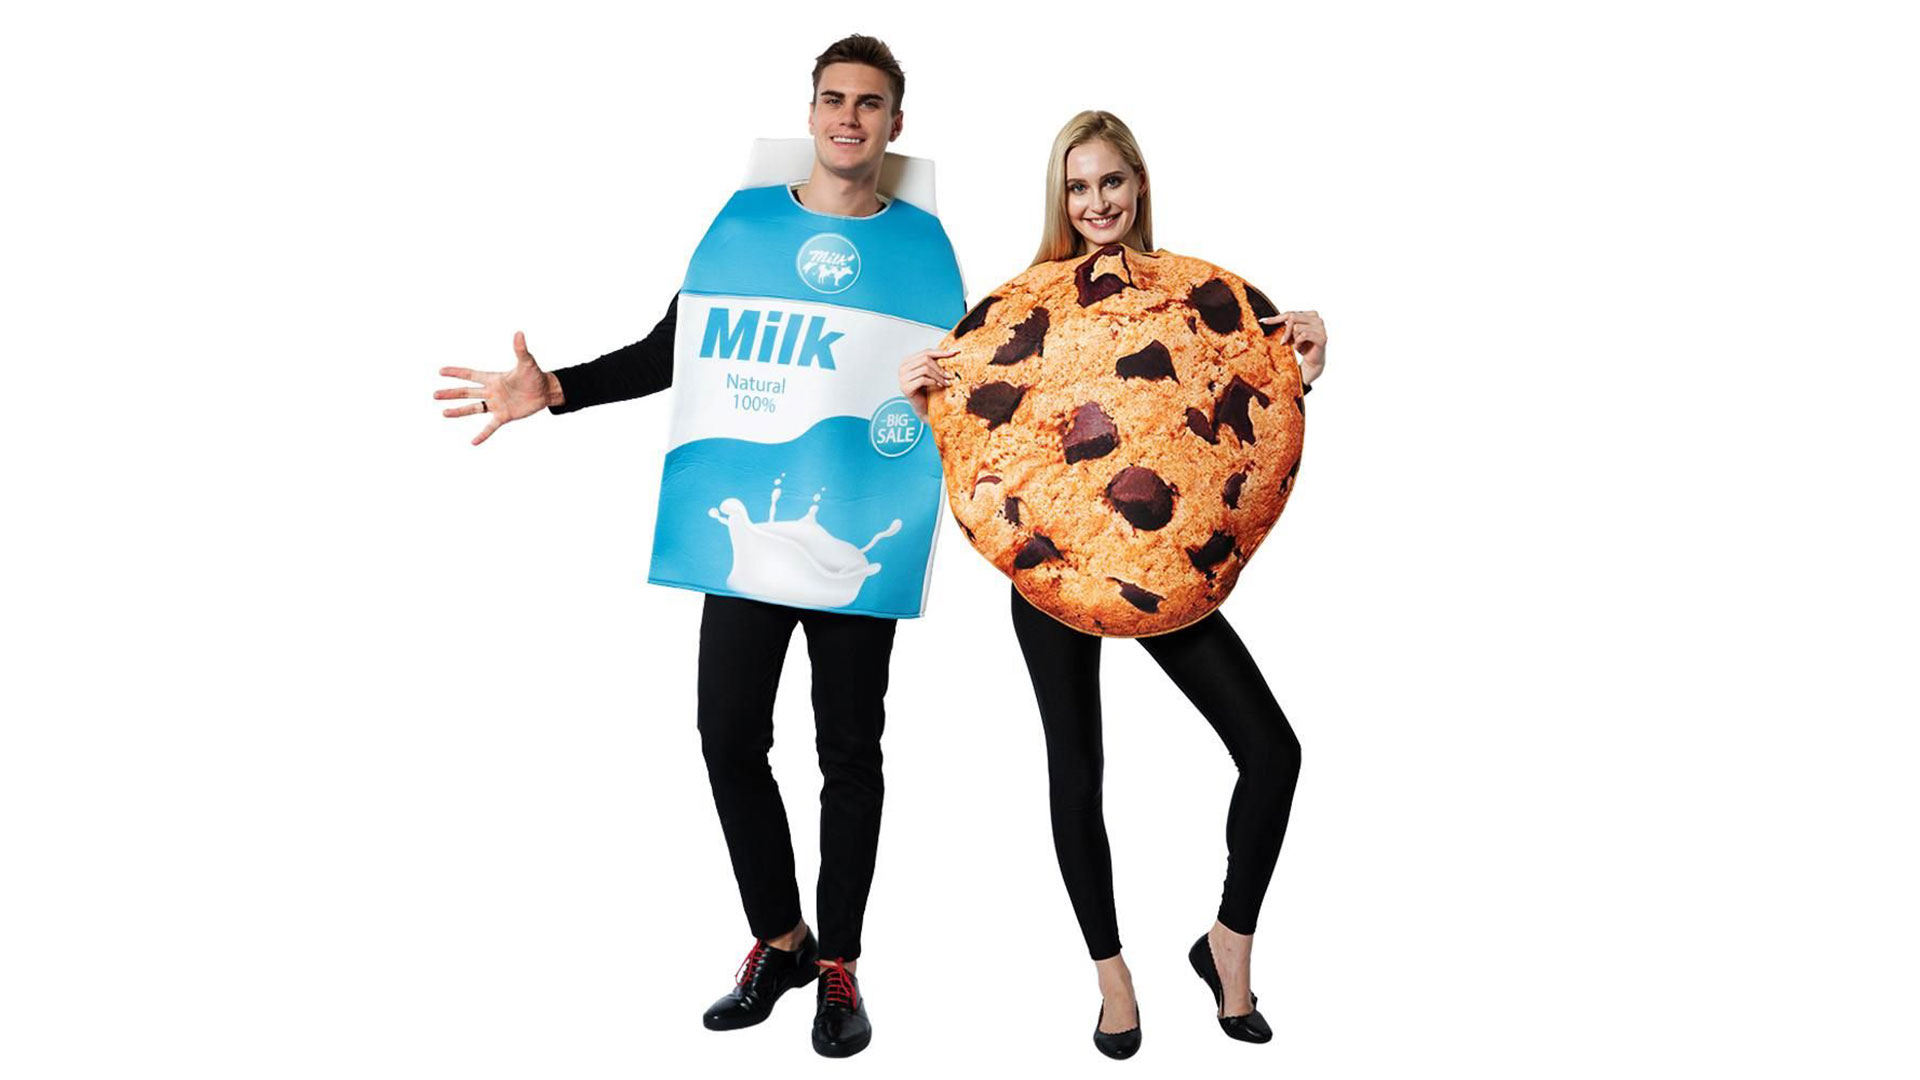 Couple dressed up for Halloween. The male is wearing a milk carton costume and the female is wearing a cookie costume.